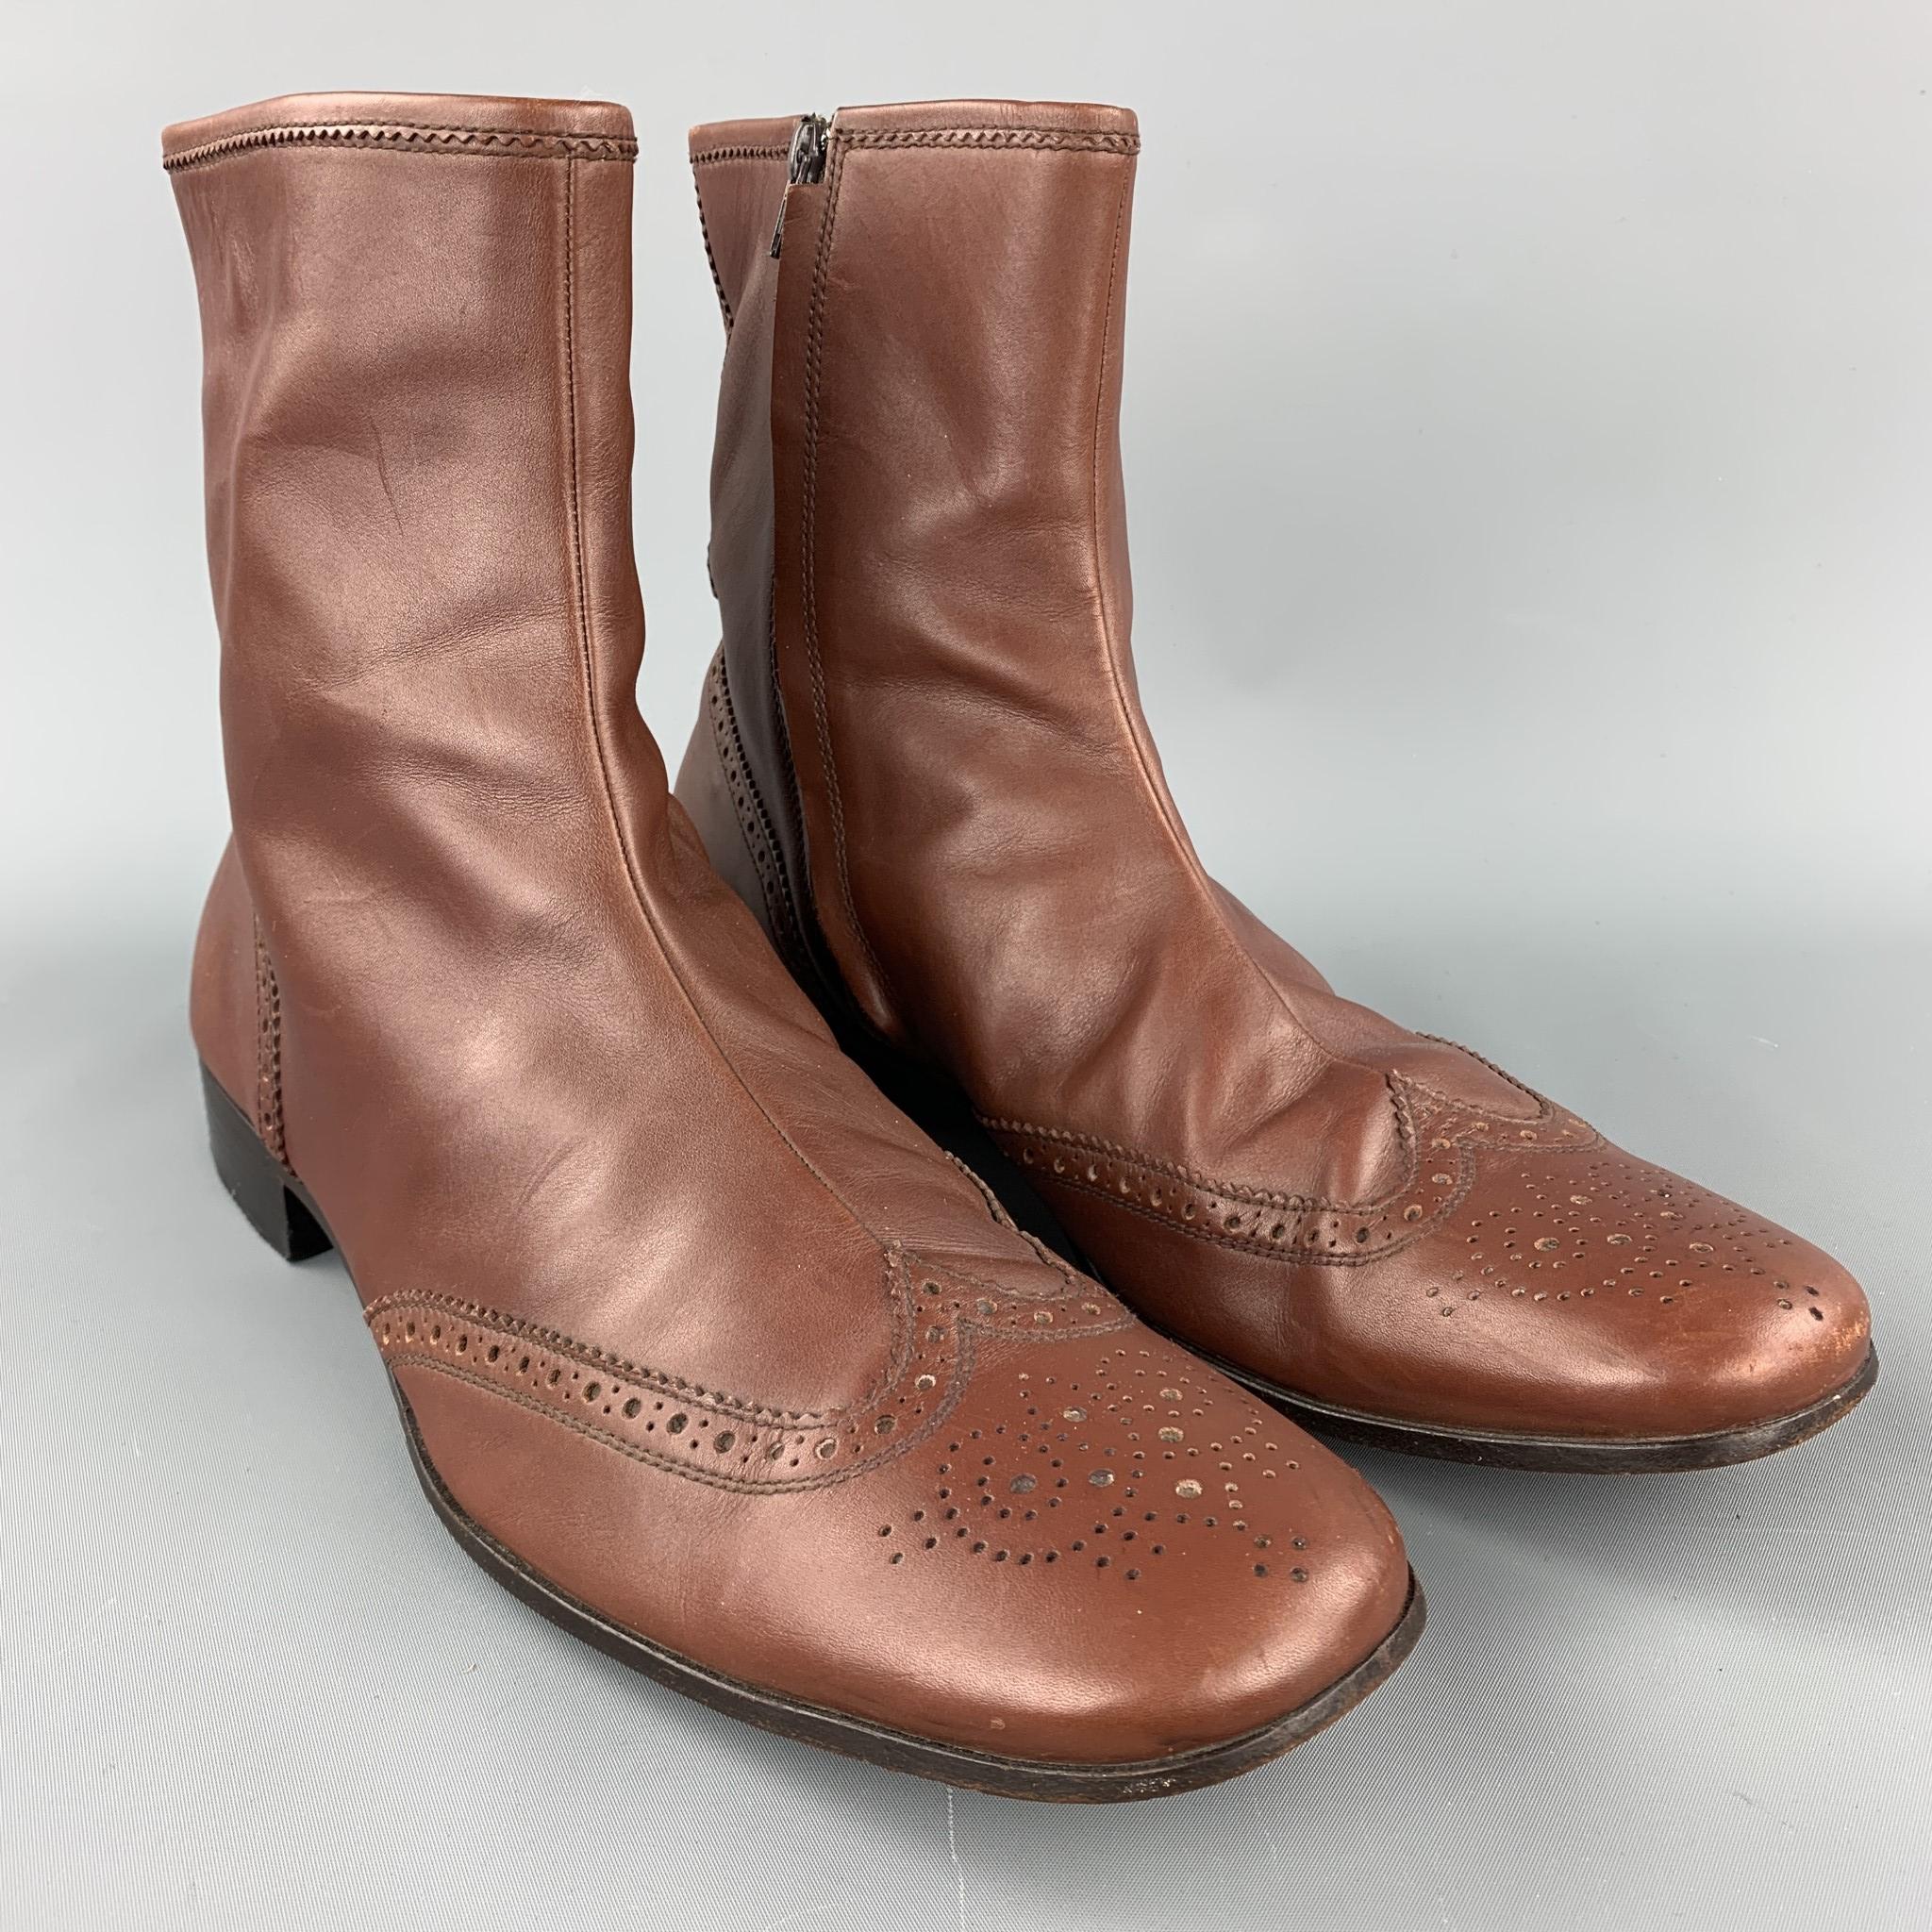 MIU MIU boots comes in a brown perforated leather featuring a wingtip, wooden sole, and a side zipper closure. Made in Italy.

Very Good Pre-Owned Condition.
Marked: 11

Measurements:

Length: 13 in. 
Width: 4 in. 
Height: 8.5 in. 

SKU: